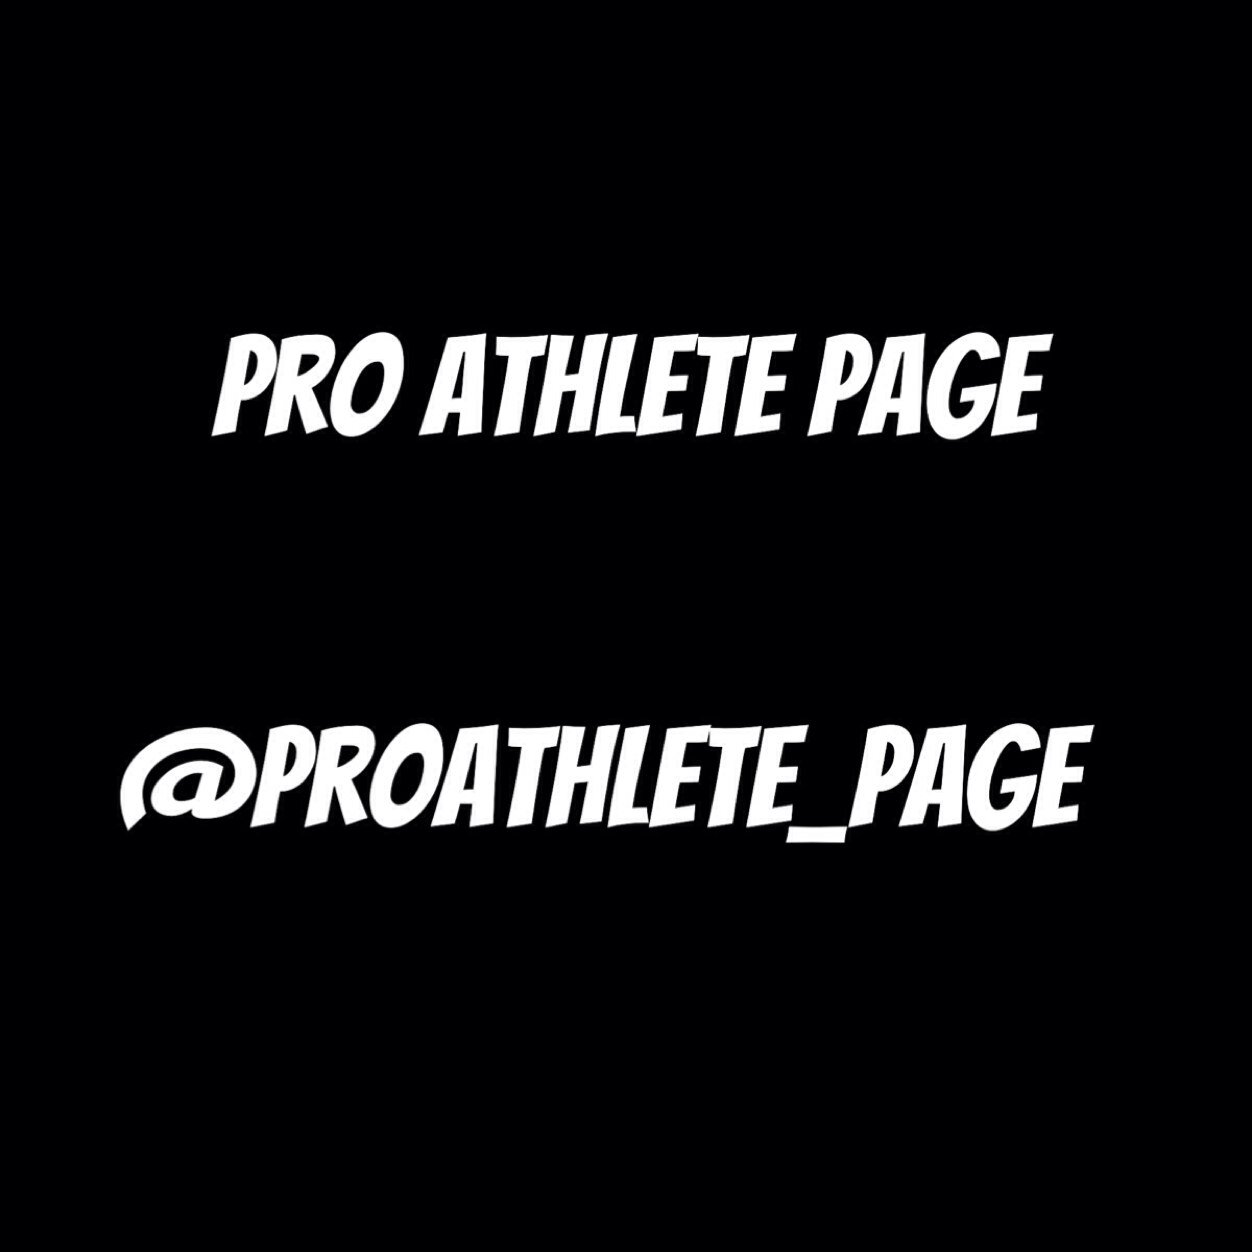 Official Pro Athlete Page. This is the Pro Athlete Player Union, official page. All Pro Athletes follow. Our page will also help Pro Prospects out. **USA**